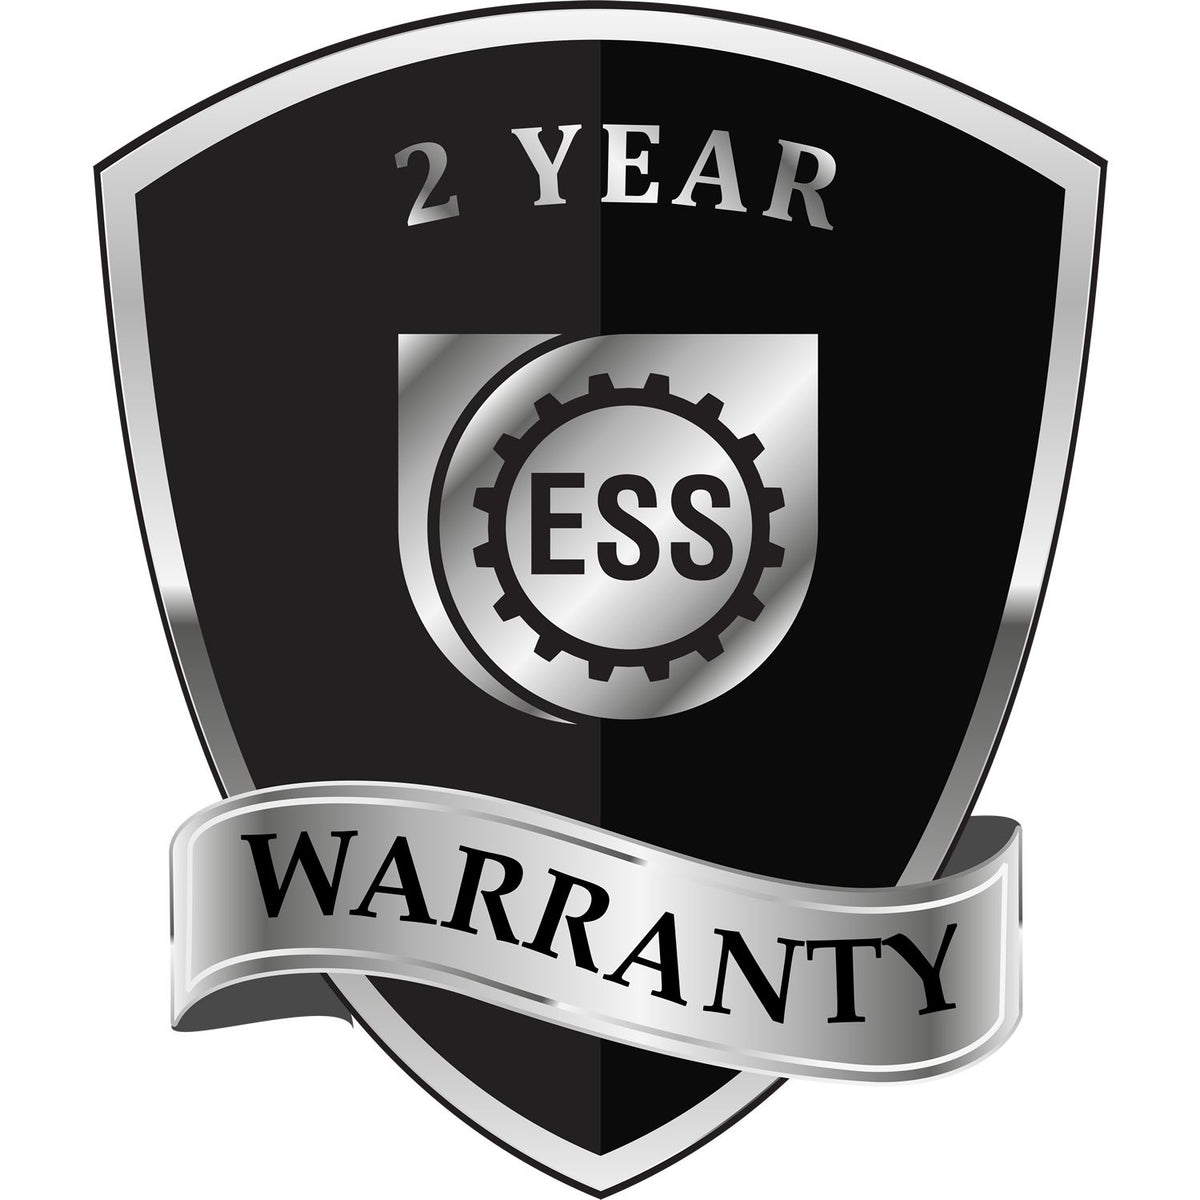 A black and silver badge or emblem showing warranty information for the Gift Washington Architect Seal